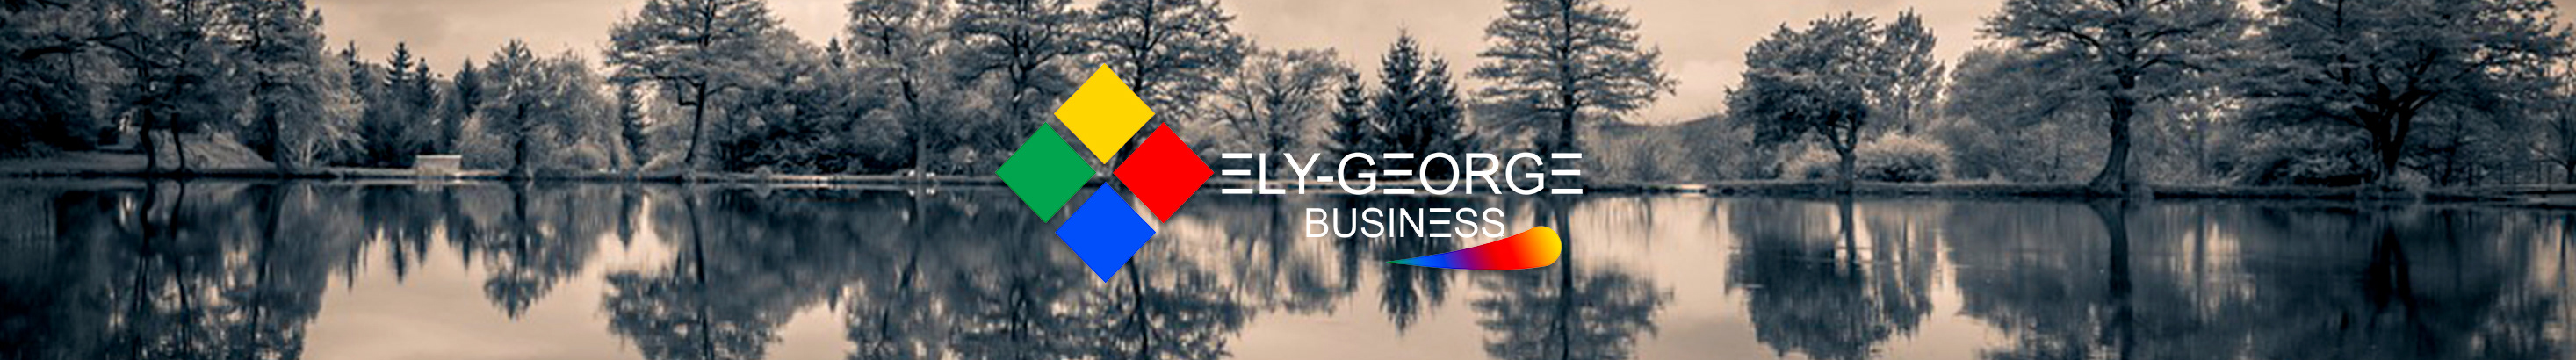 Ely-george Business's profile banner